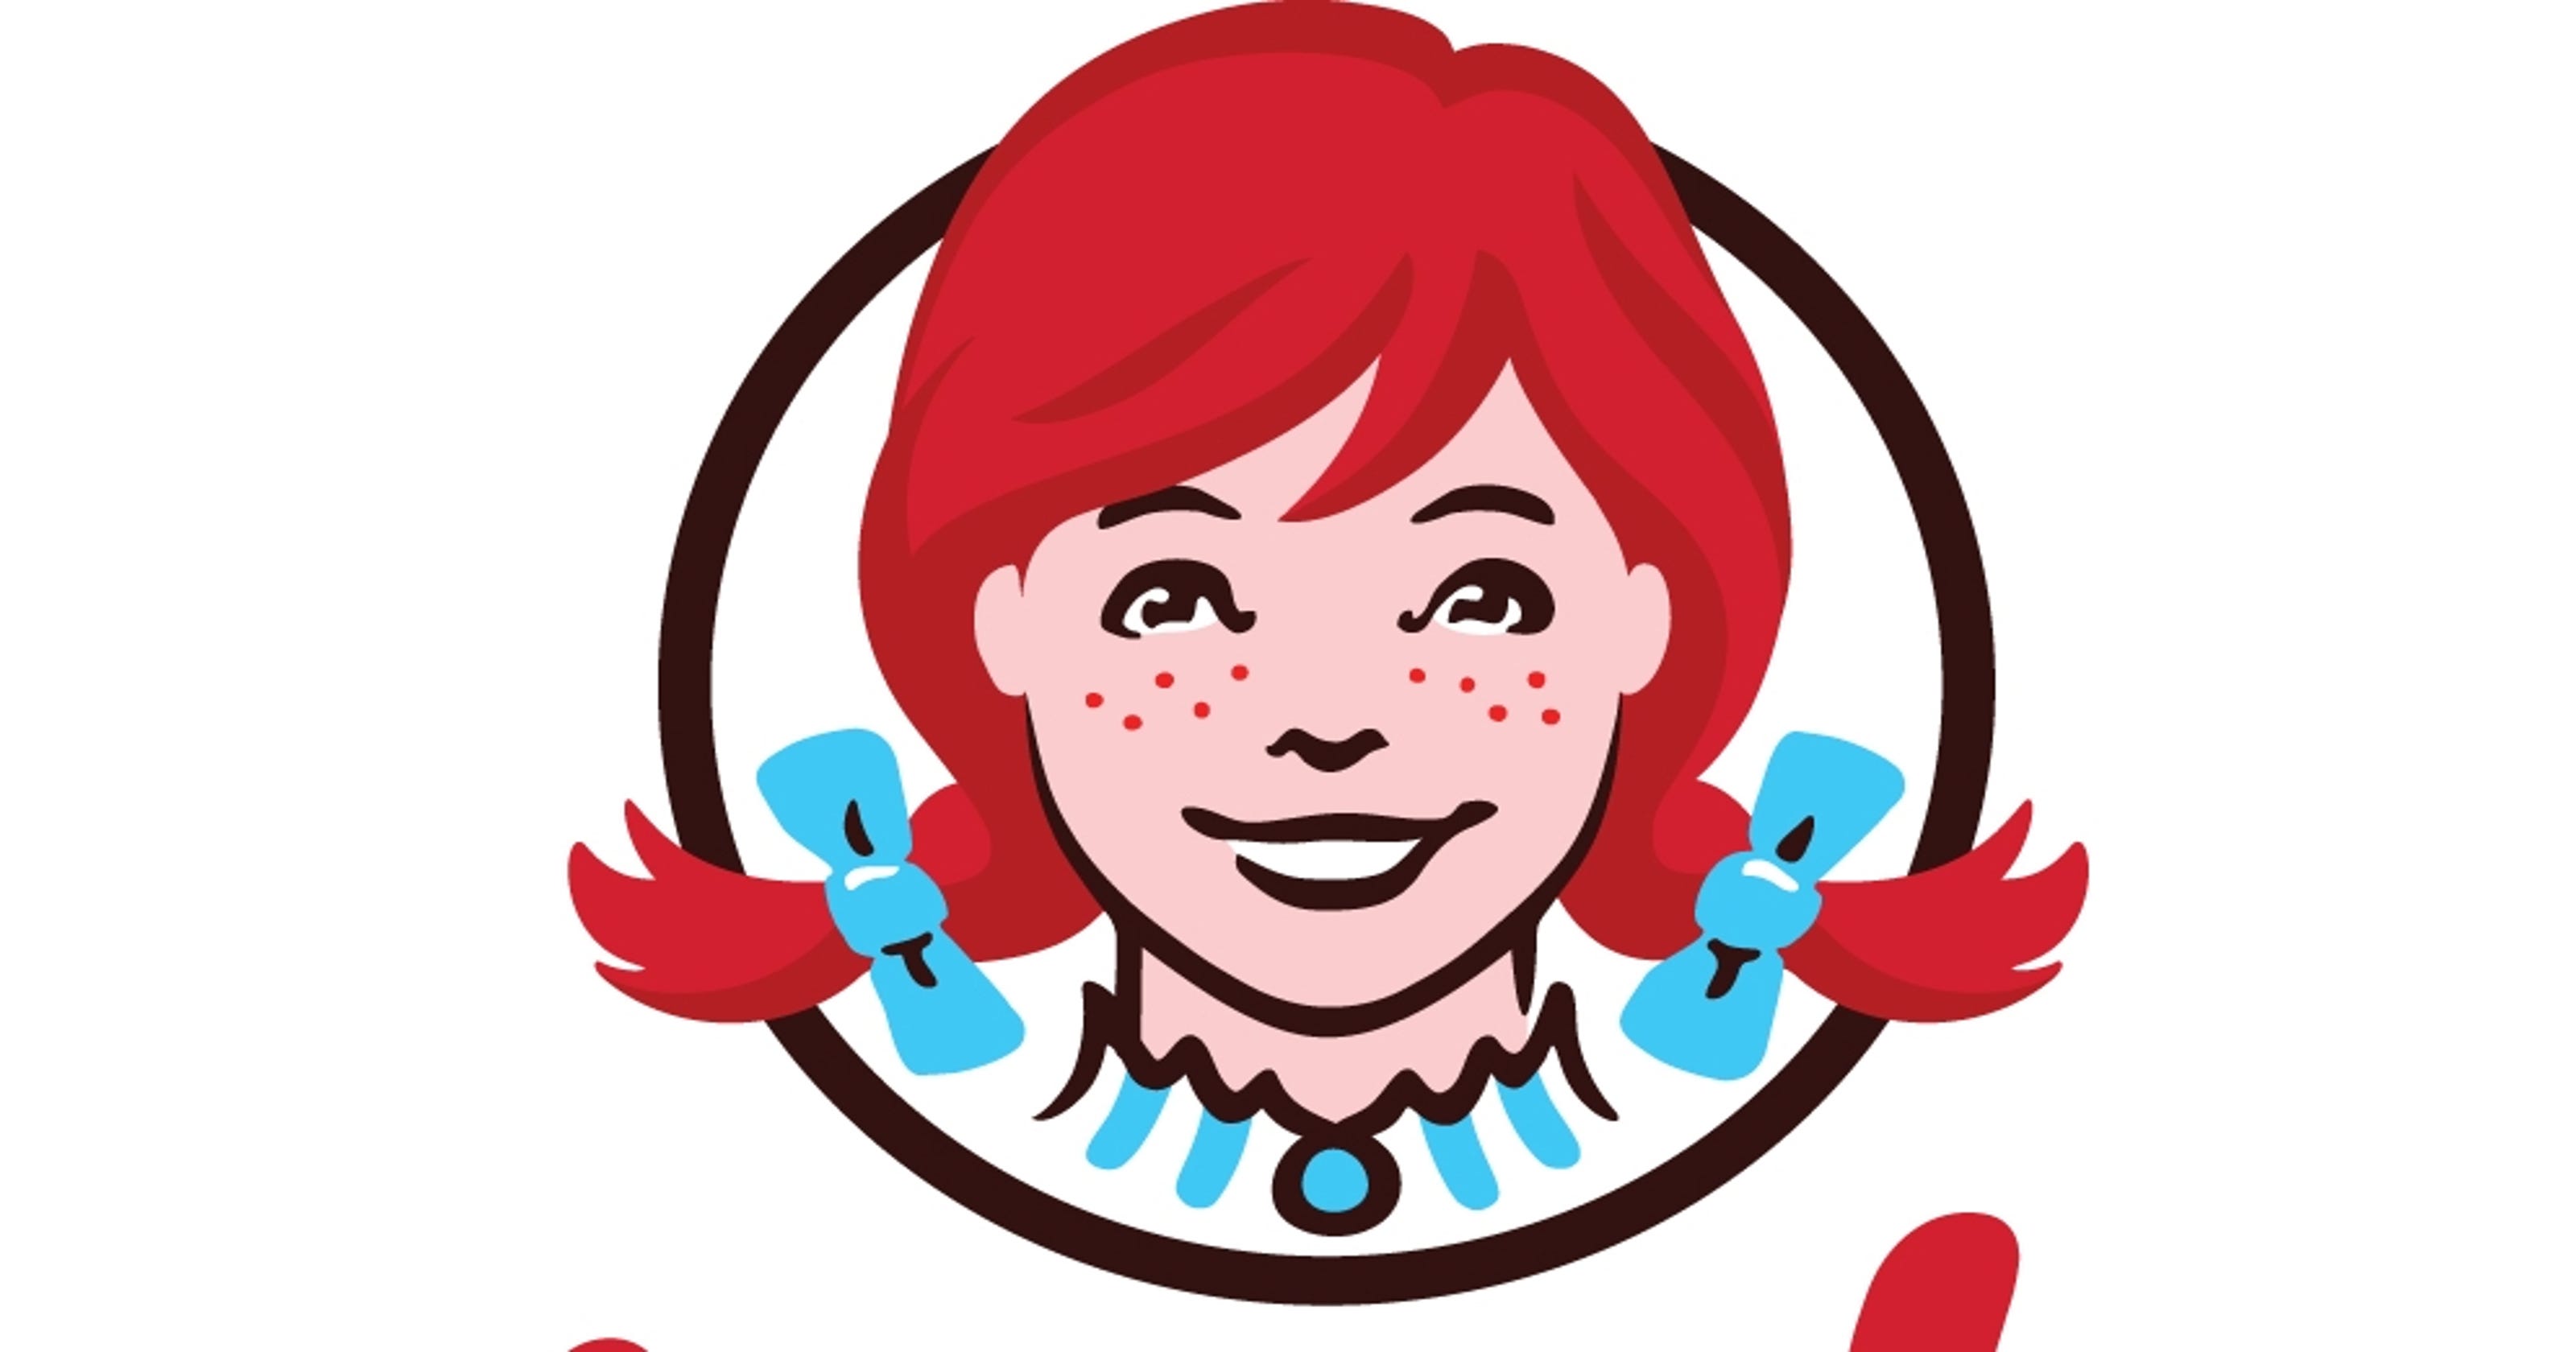 Wendy's logo gets a makeover, first since 1983